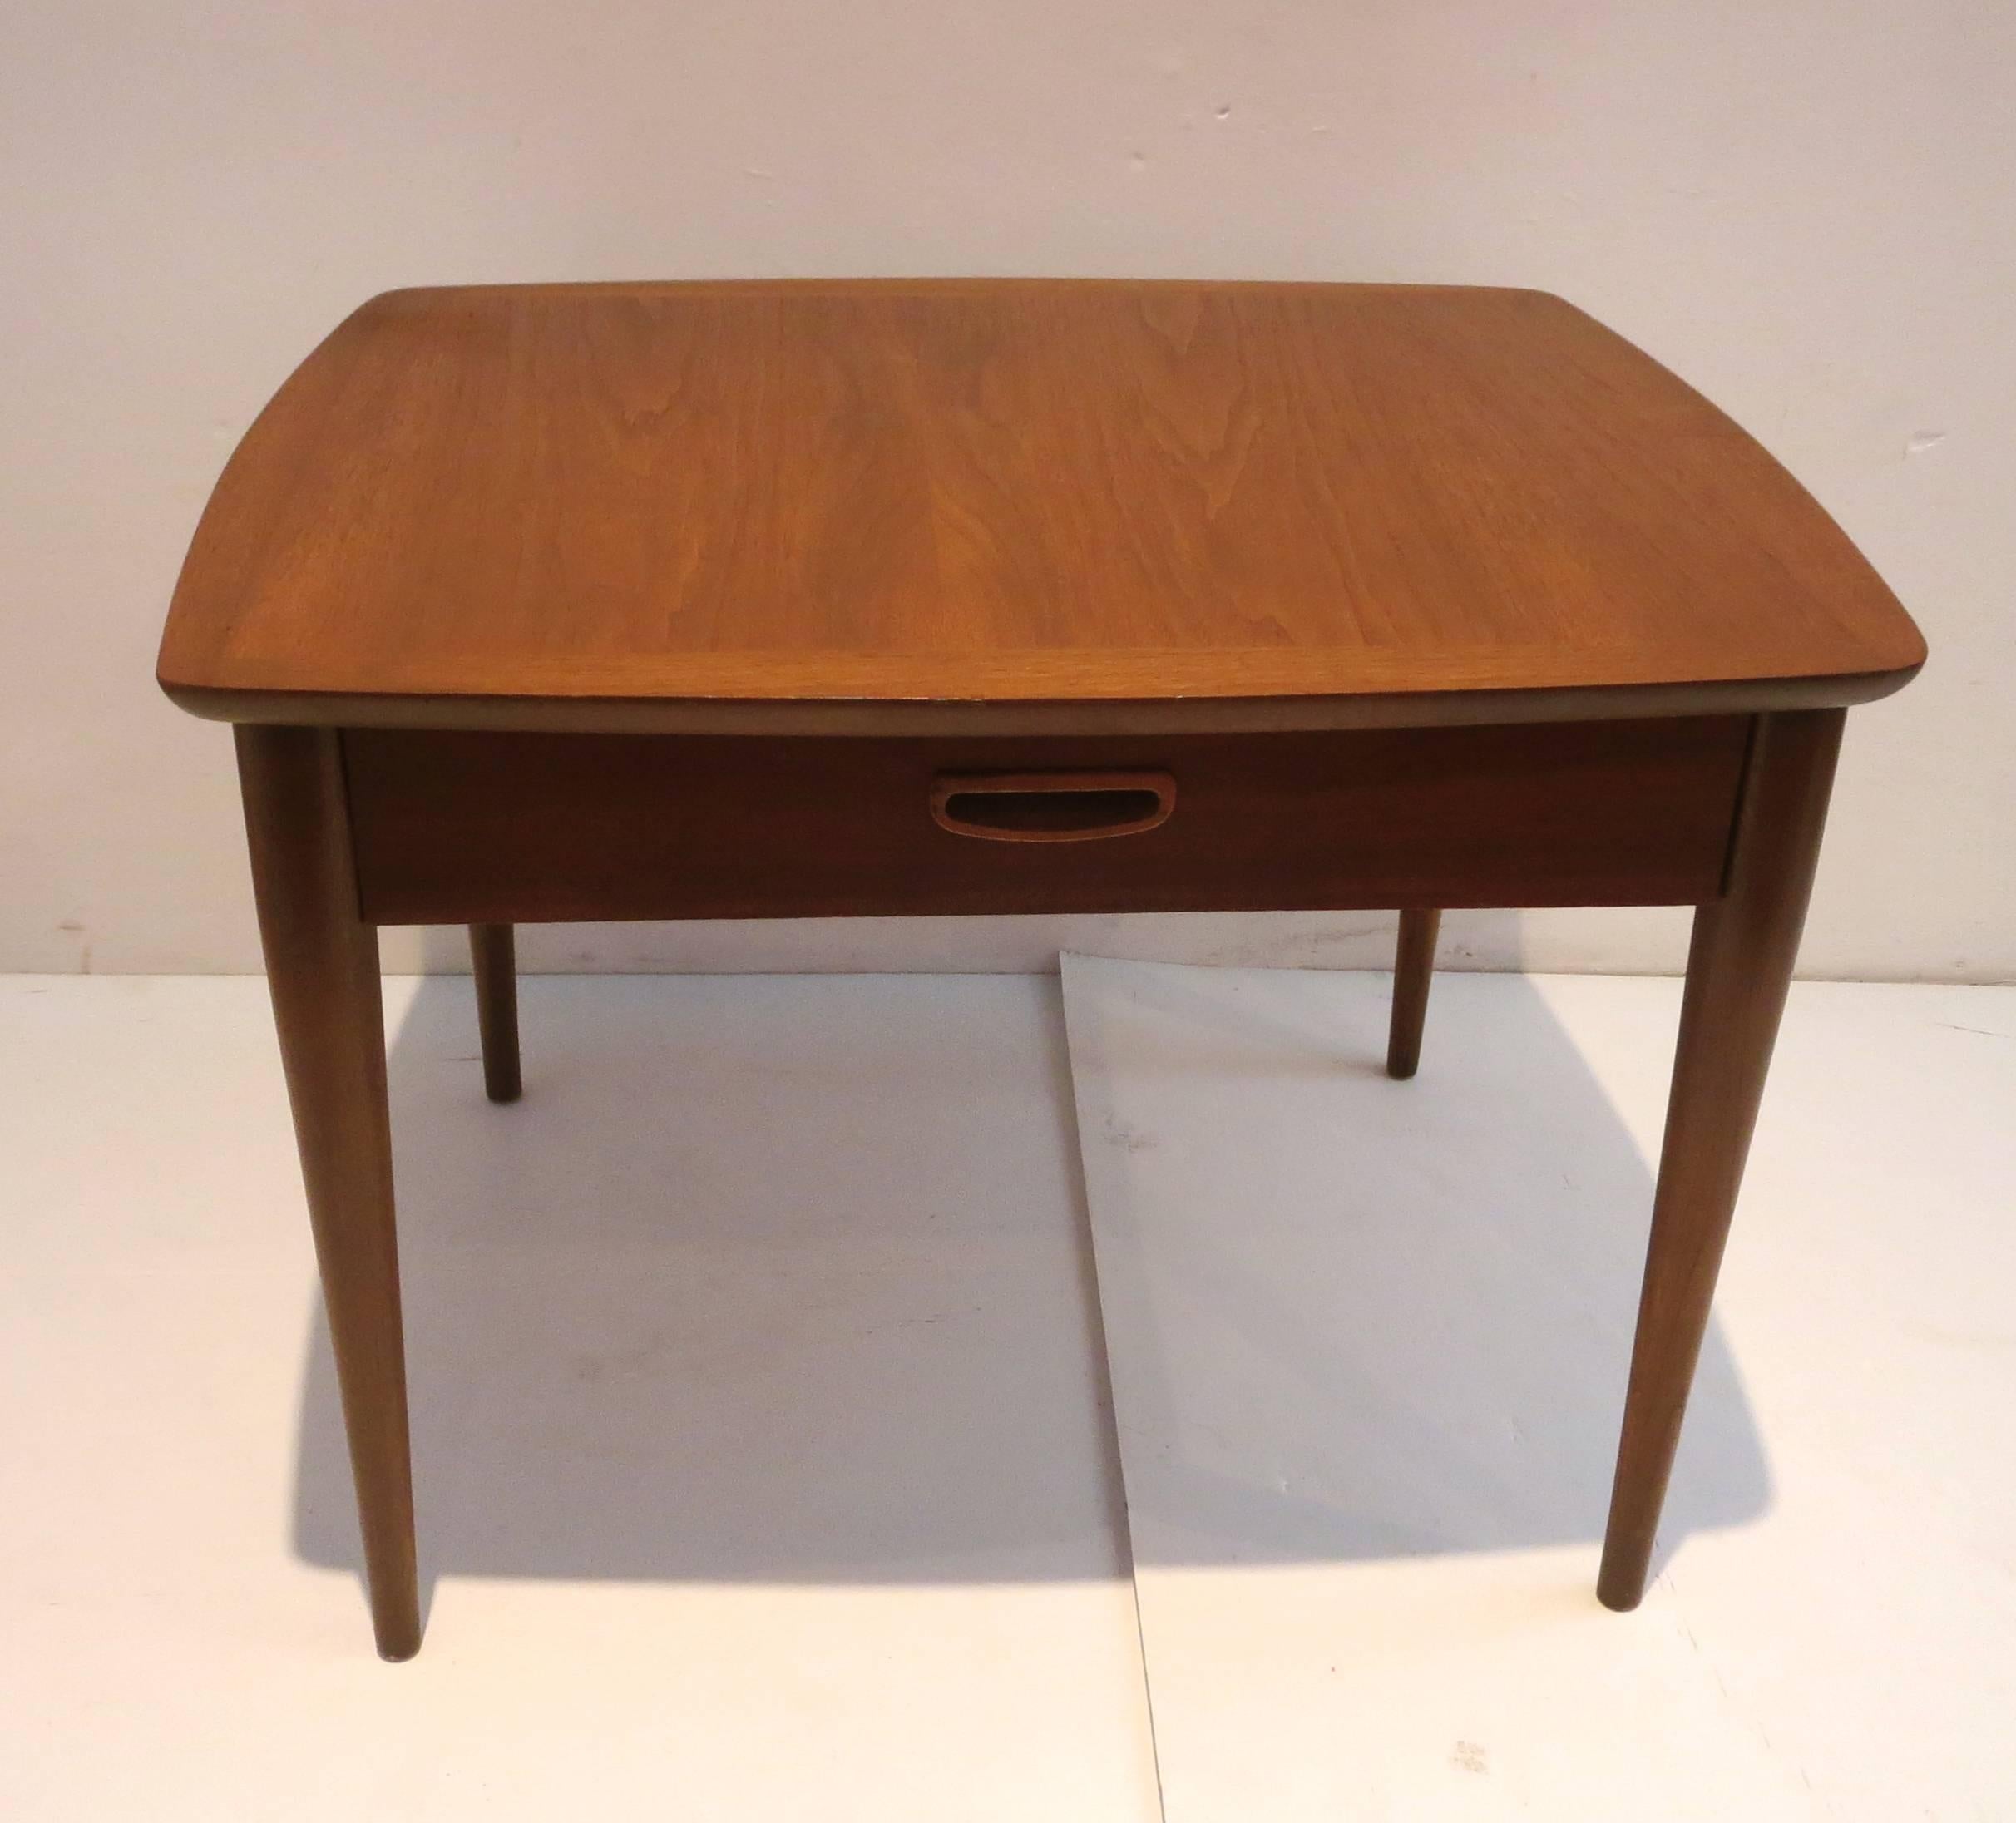 Beautiful simple American walnut square end cocktail end table, circa 1950s freshly refinished solid and sturdy. Great for in between two club chairs furnished all the way back and front can be used floating in the middle of the room.